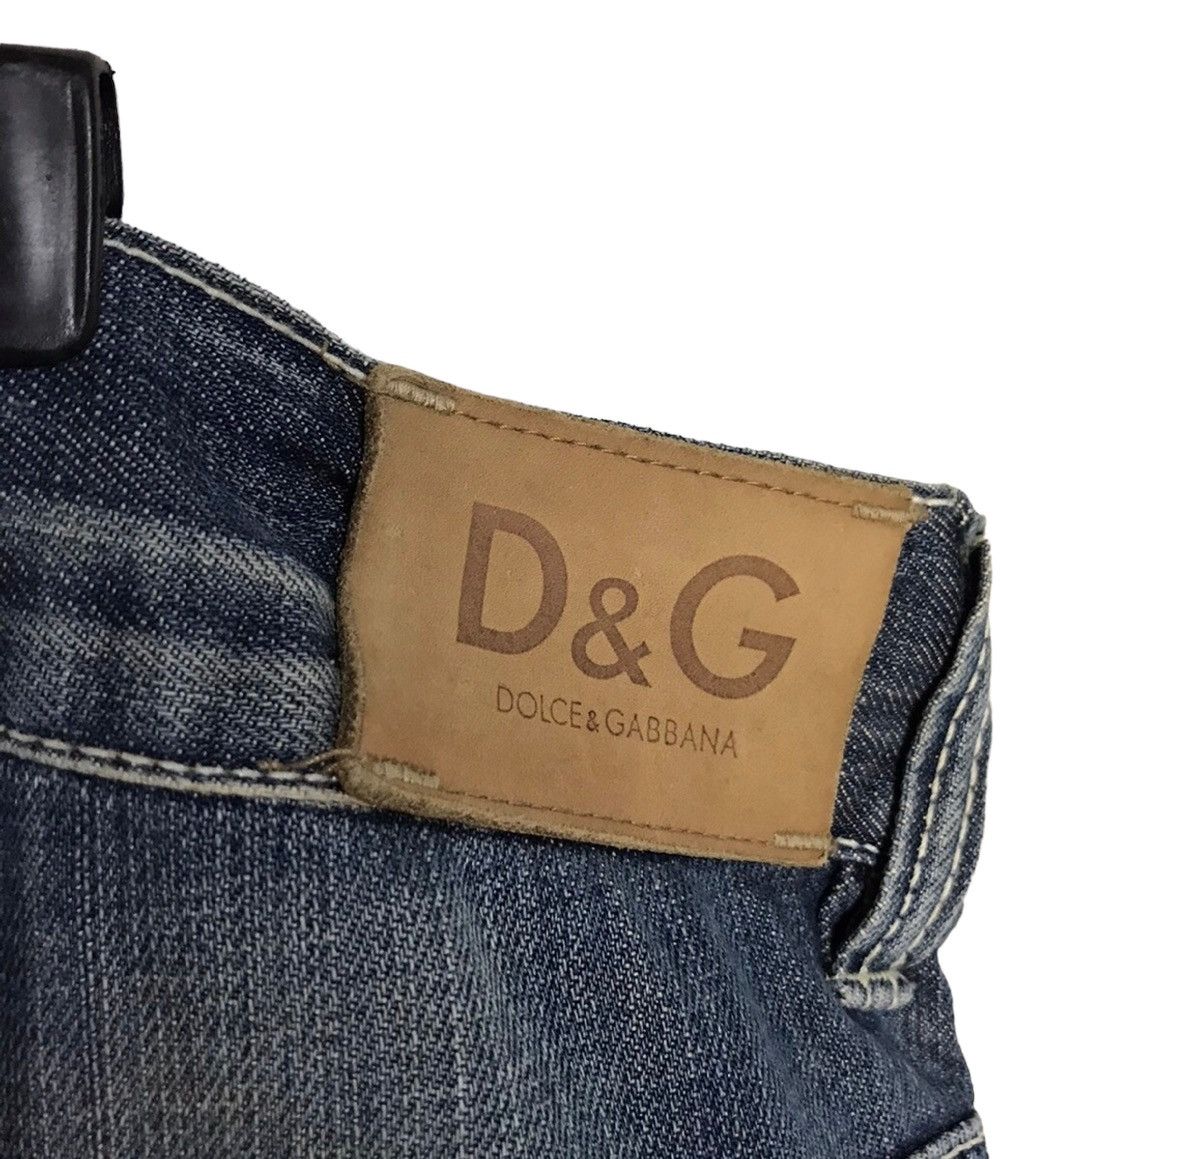 D&G denim pants made in italy - 3